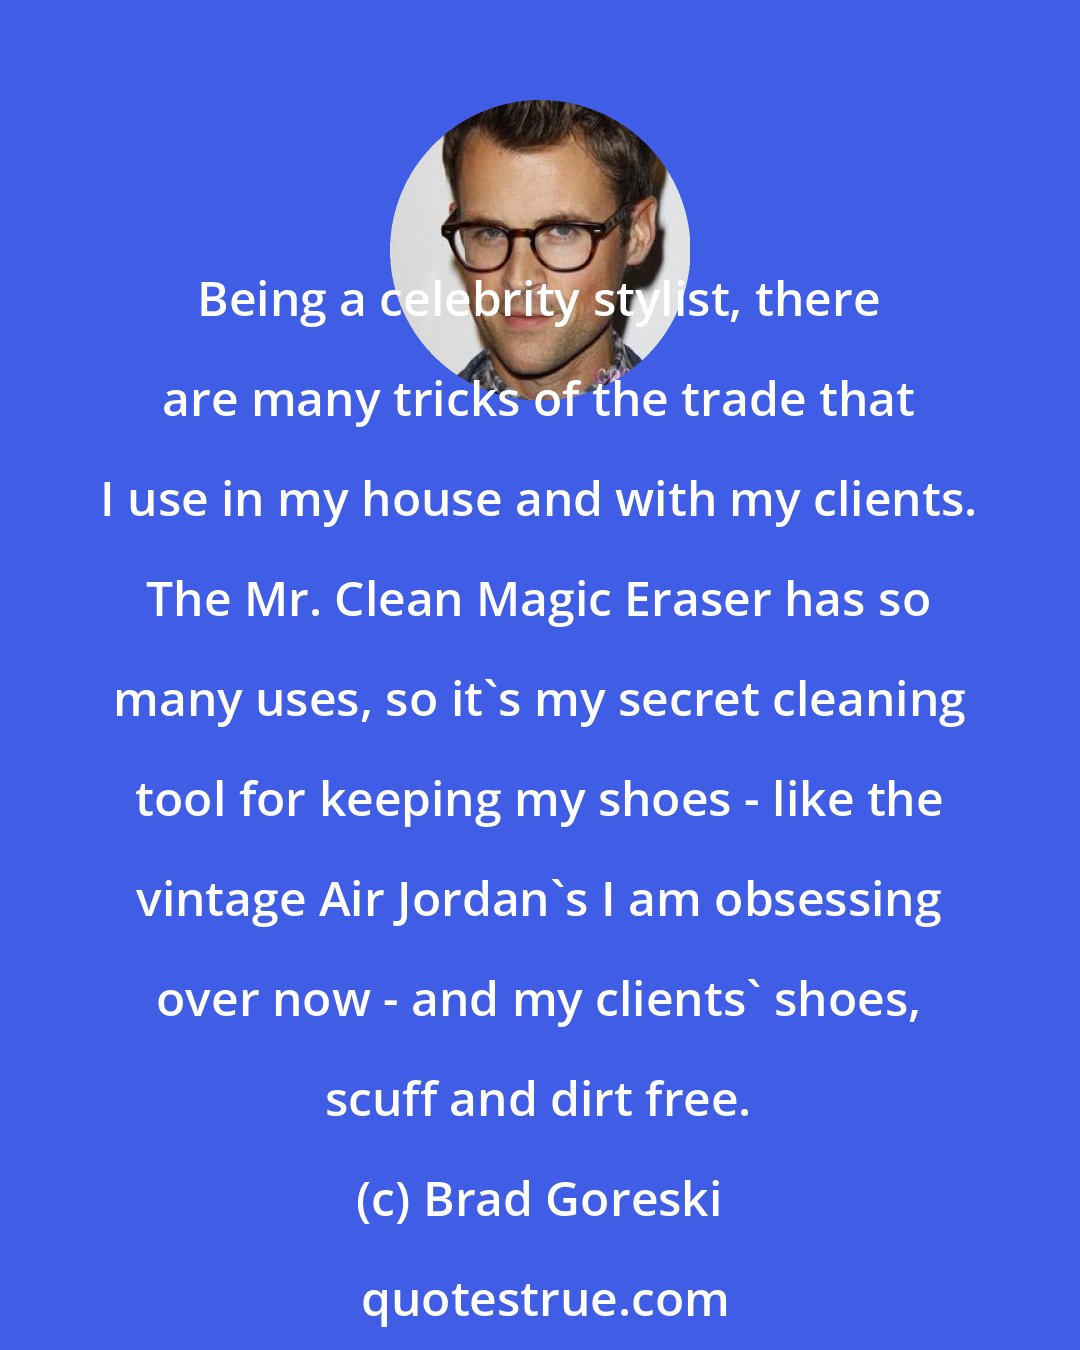 Brad Goreski: Being a celebrity stylist, there are many tricks of the trade that I use in my house and with my clients. The Mr. Clean Magic Eraser has so many uses, so it's my secret cleaning tool for keeping my shoes - like the vintage Air Jordan's I am obsessing over now - and my clients' shoes, scuff and dirt free.